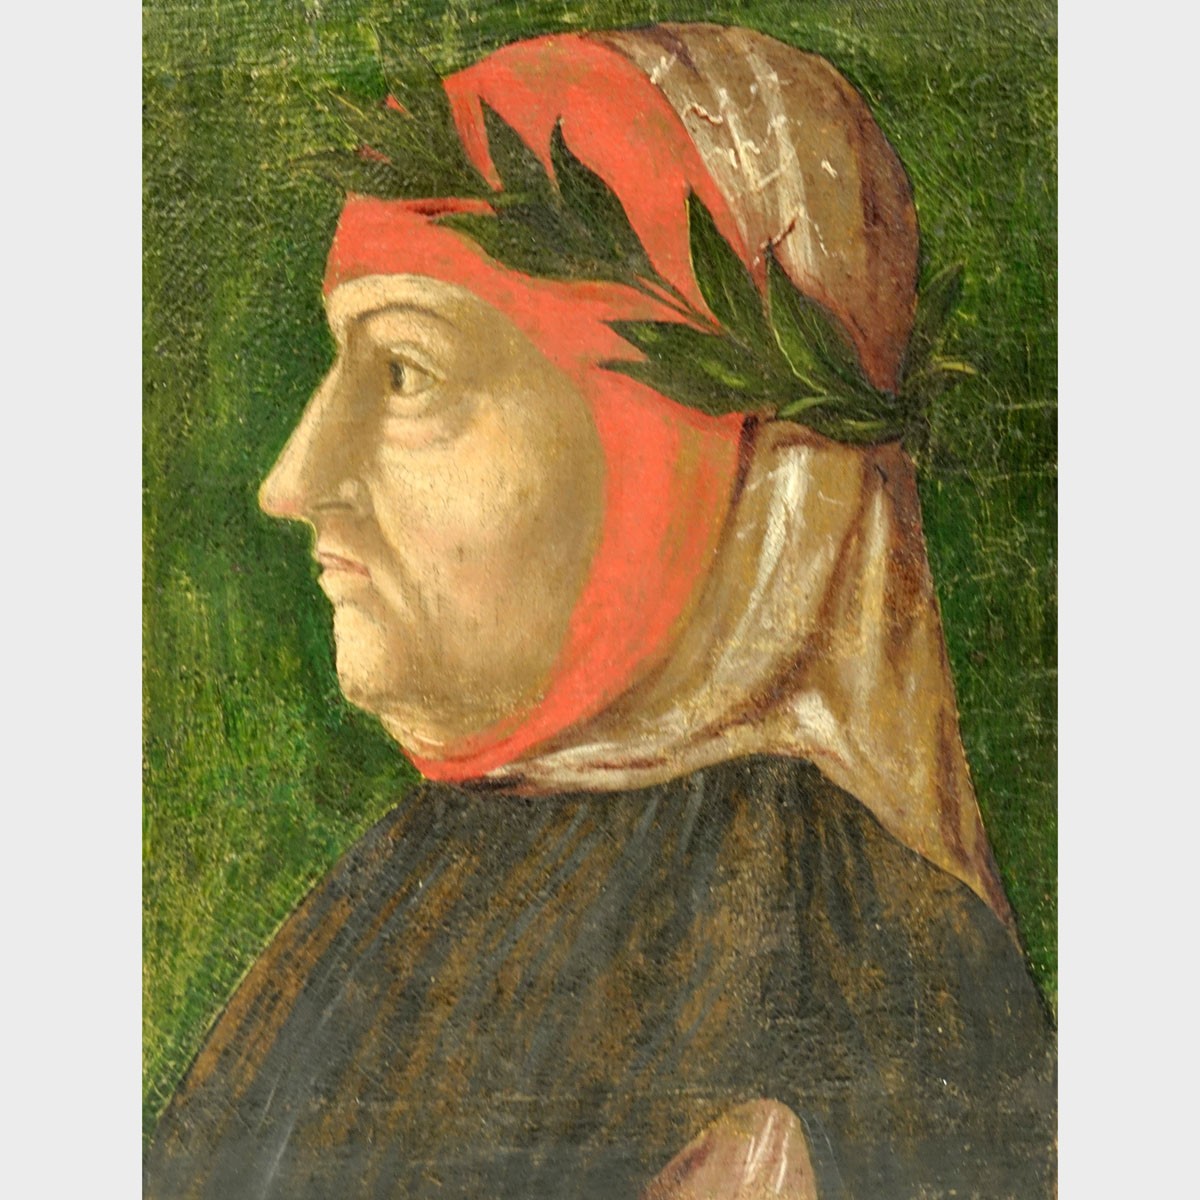 Follower of Masaccio, Italian (1401 - 1428) Oil on Canvas, Presumed Depiction of Filippo Brunelleschi, Unsigned. Conserved condition, heavy craquelure and paint loss, fading.